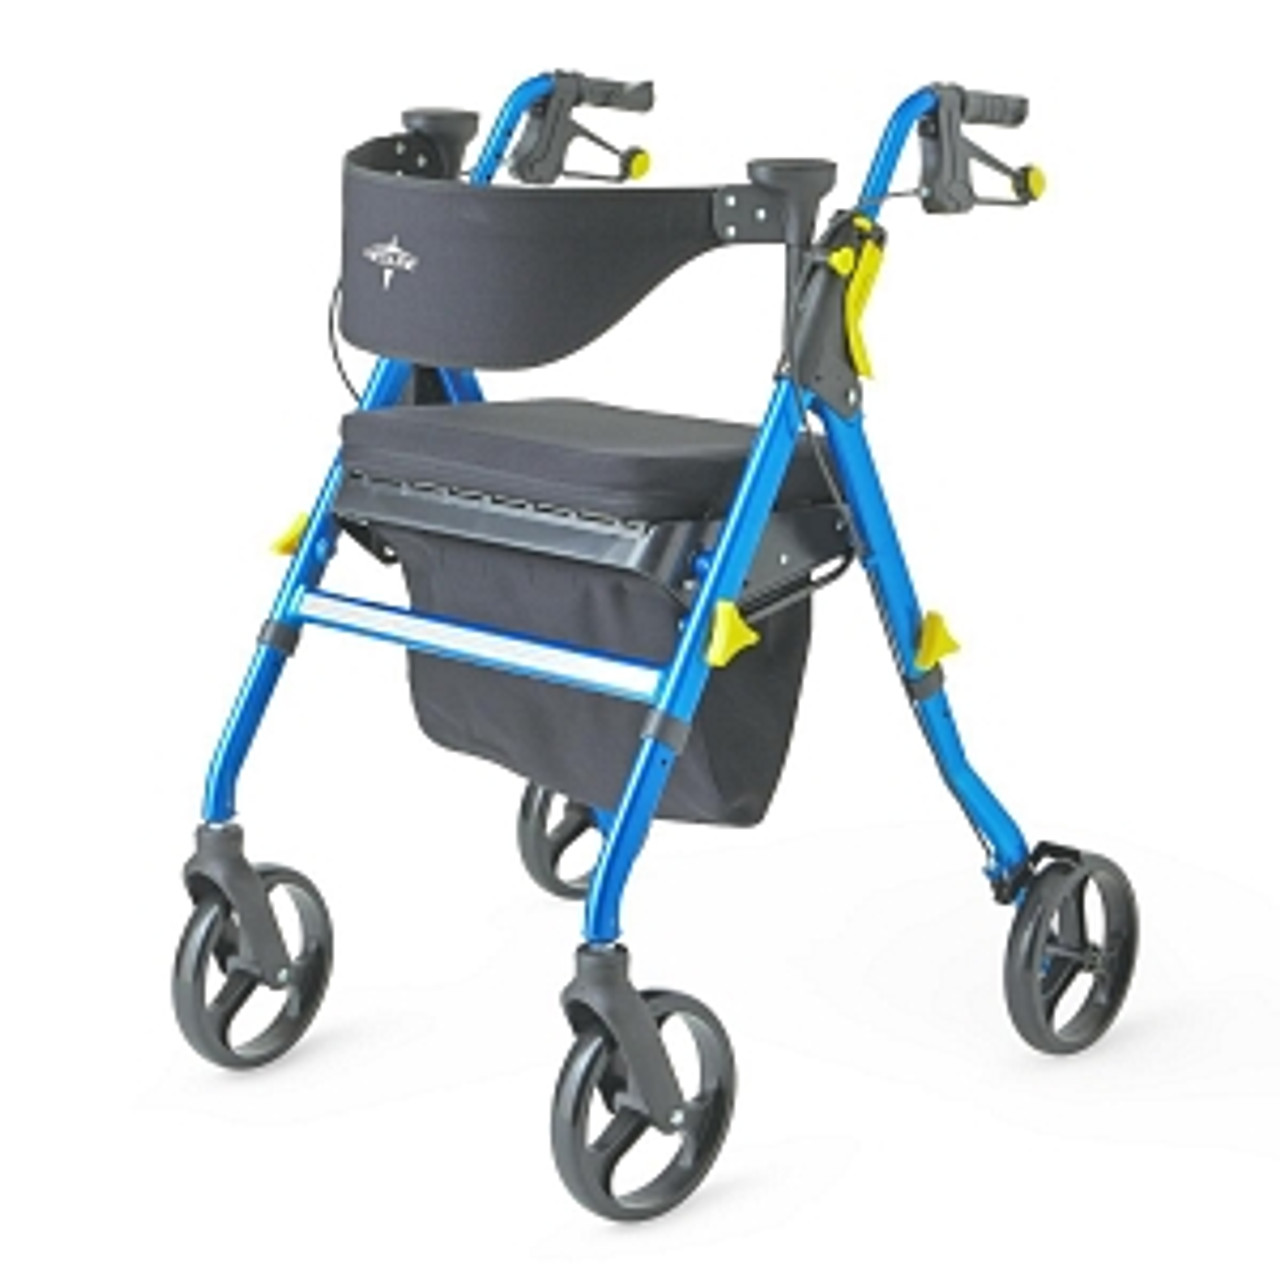 Padded backrest flips forward and backward enabling the user to sit comfortably on either side
Seat flips up to allow user to stand or walk inside the rollator
Folds completely flat for easy storage and transport
Features easy-to-identify yellow adjustment points, folding cup holder, memory foam seat and neoprene storage bag